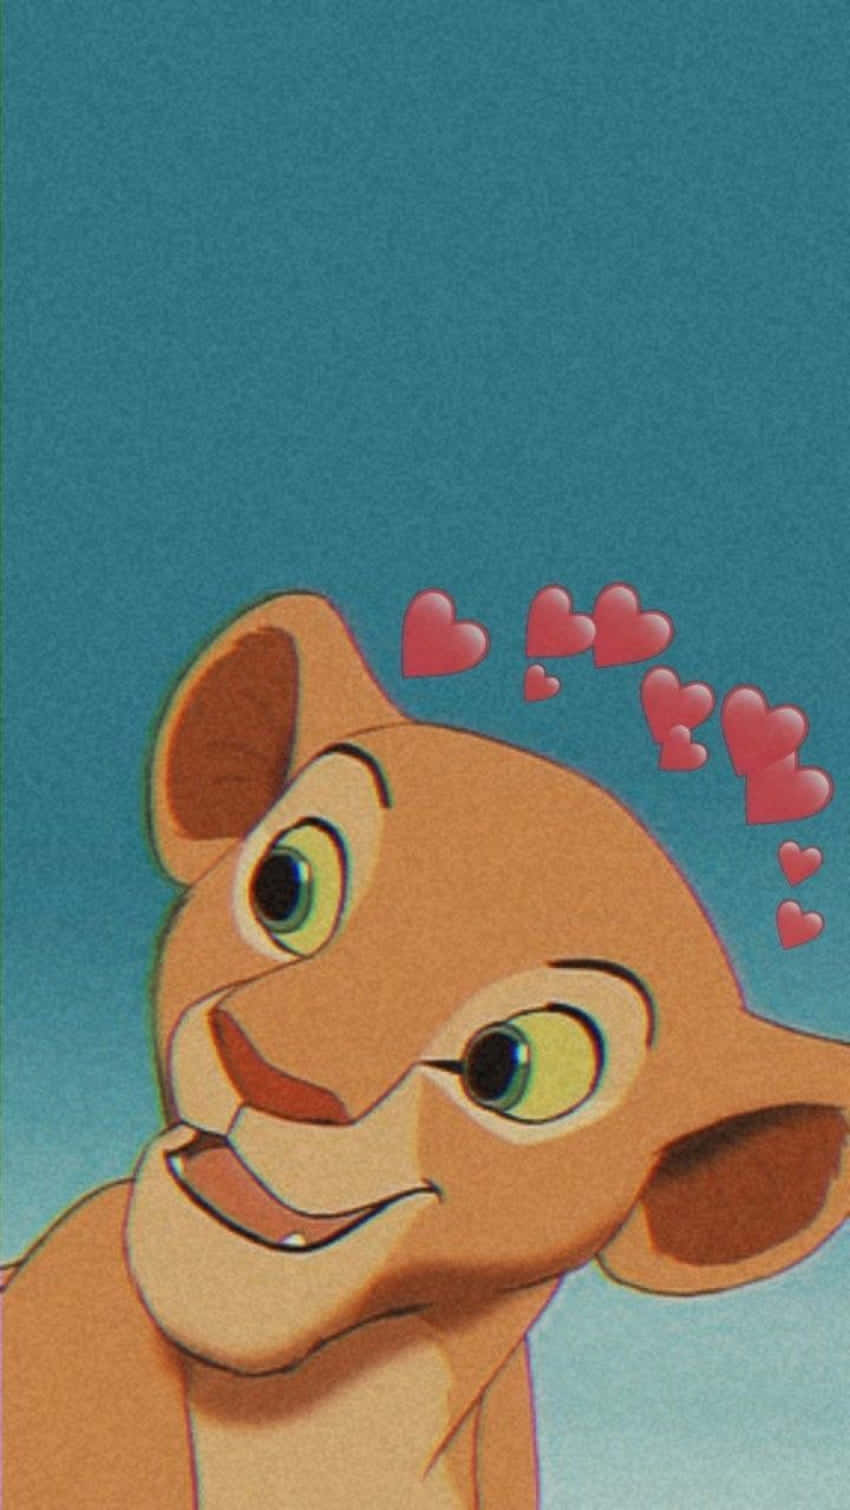 The lion king wallpaper with a cute little cub - The Lion King, profile picture